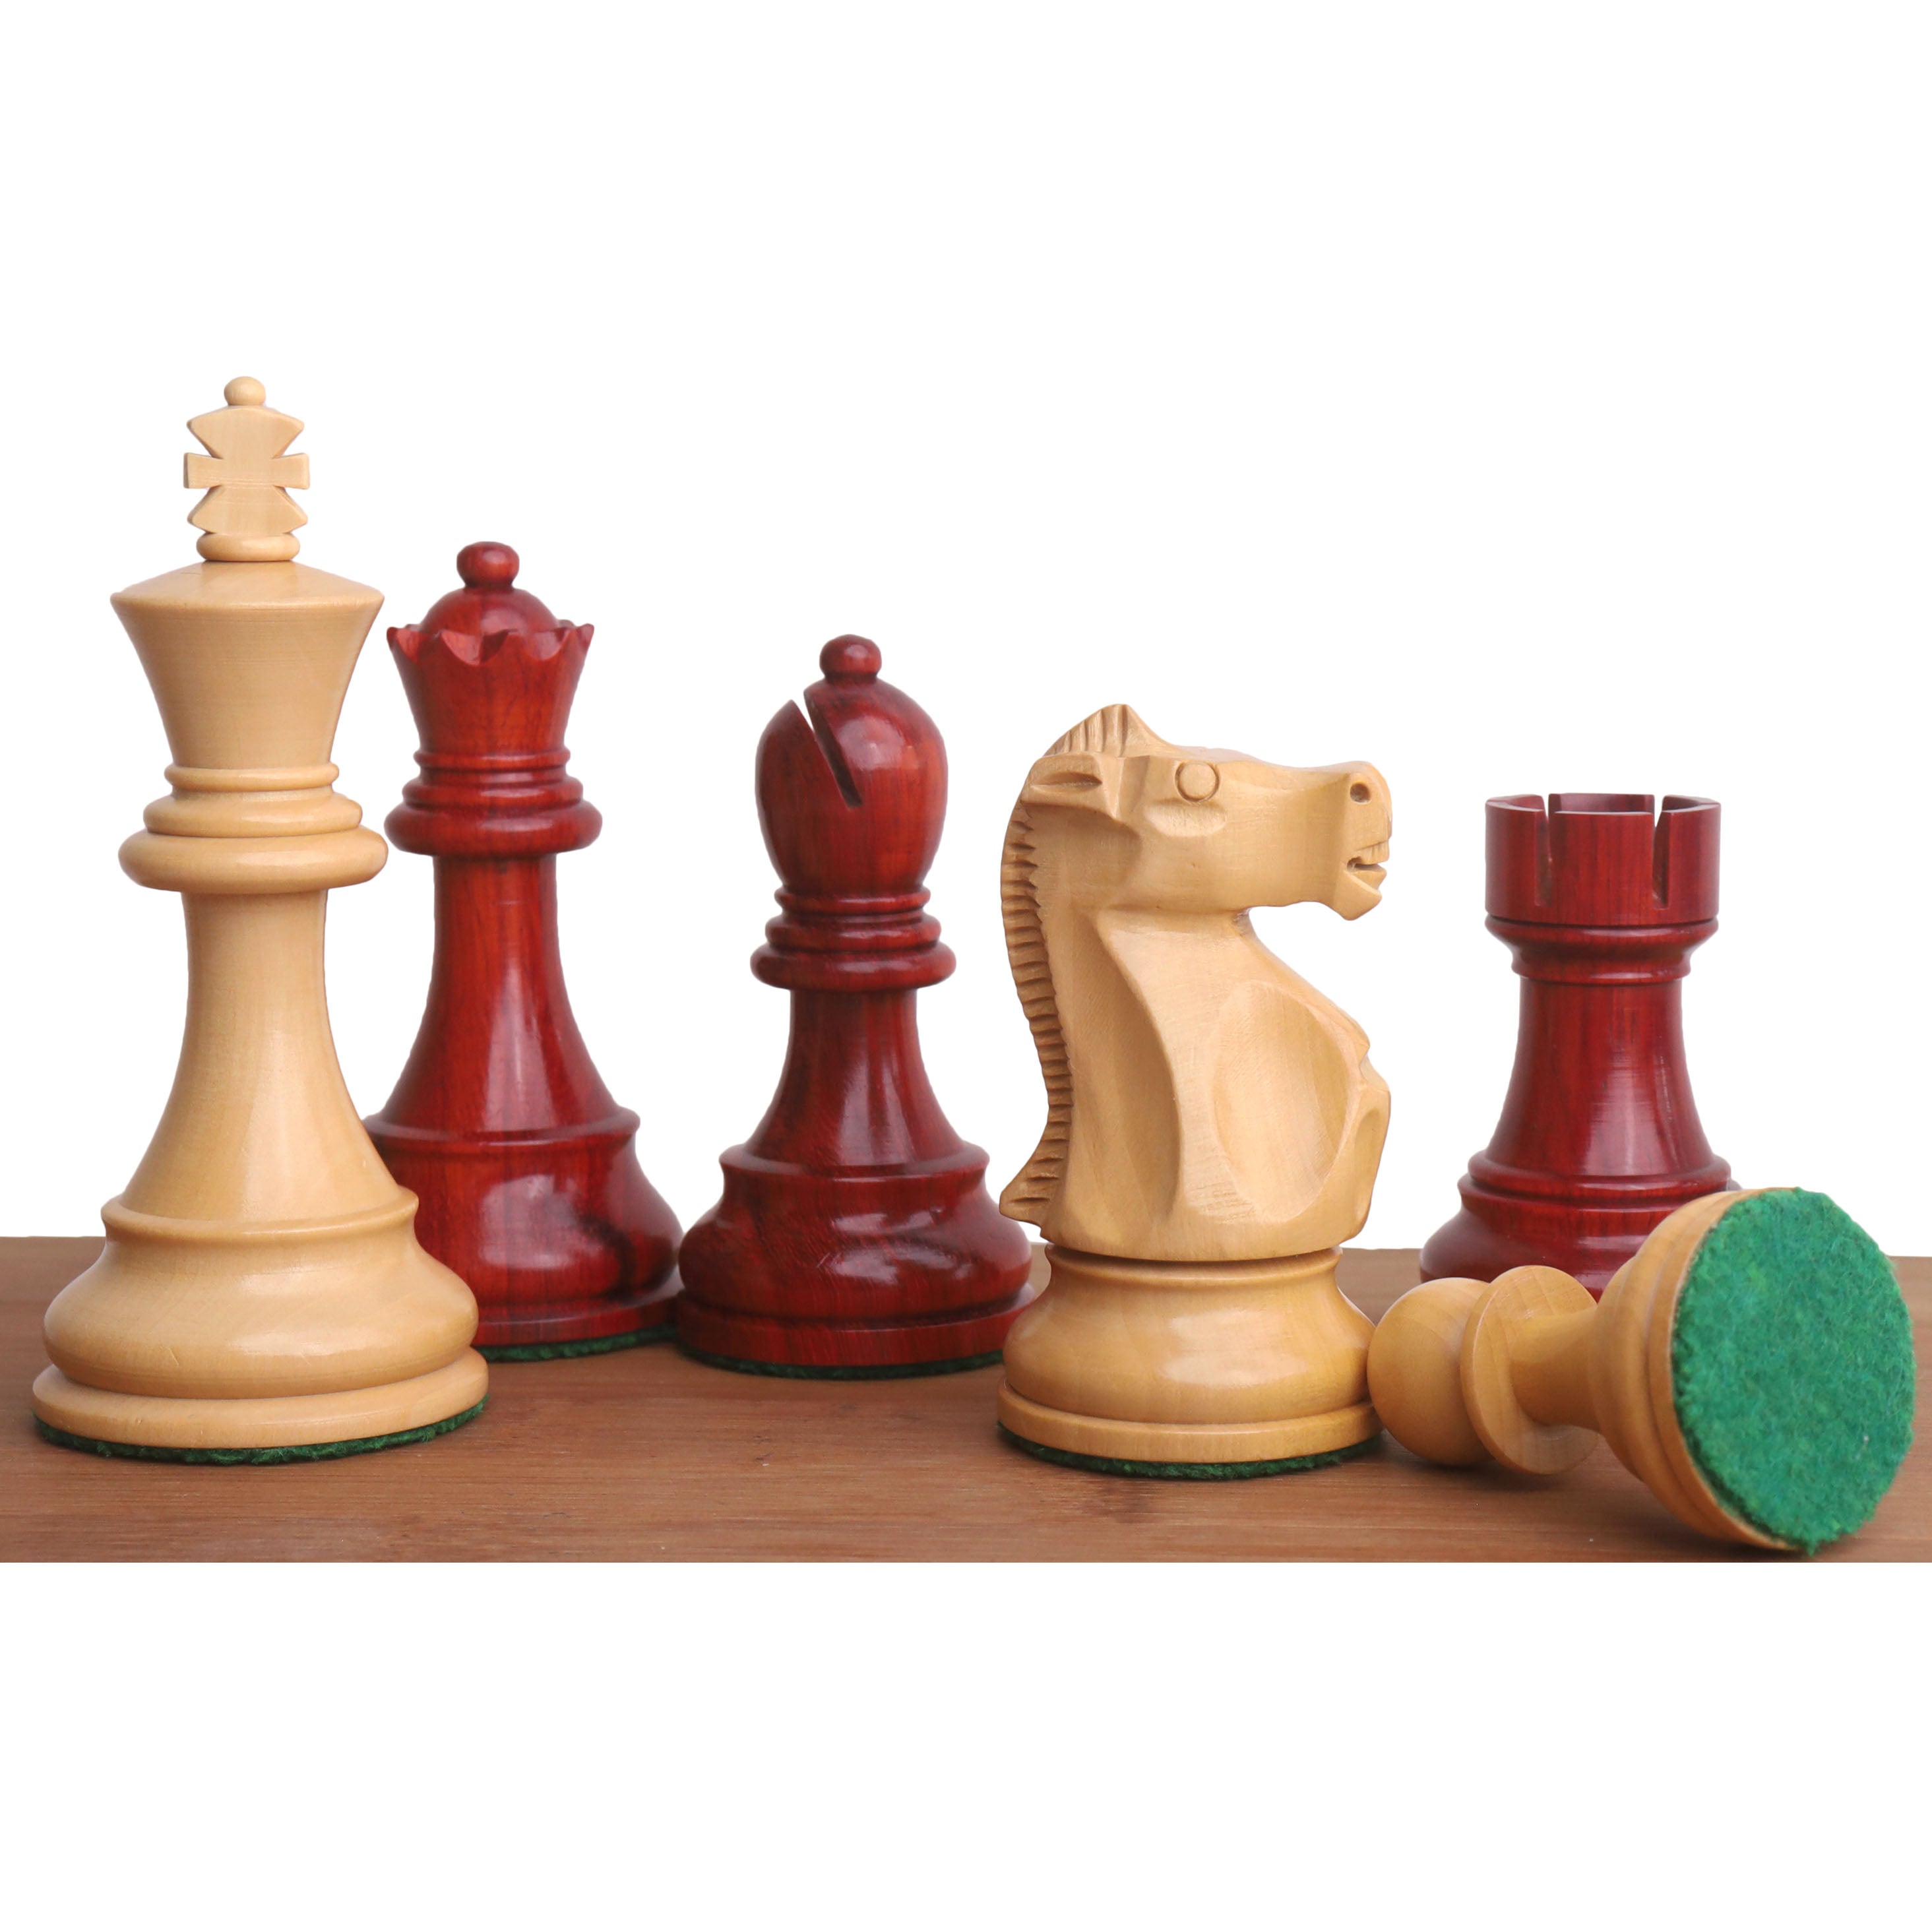 1972 Championship Fischer Spassky Chess Set- Chess Pieces Only - Double Weighted Bud Rosewood